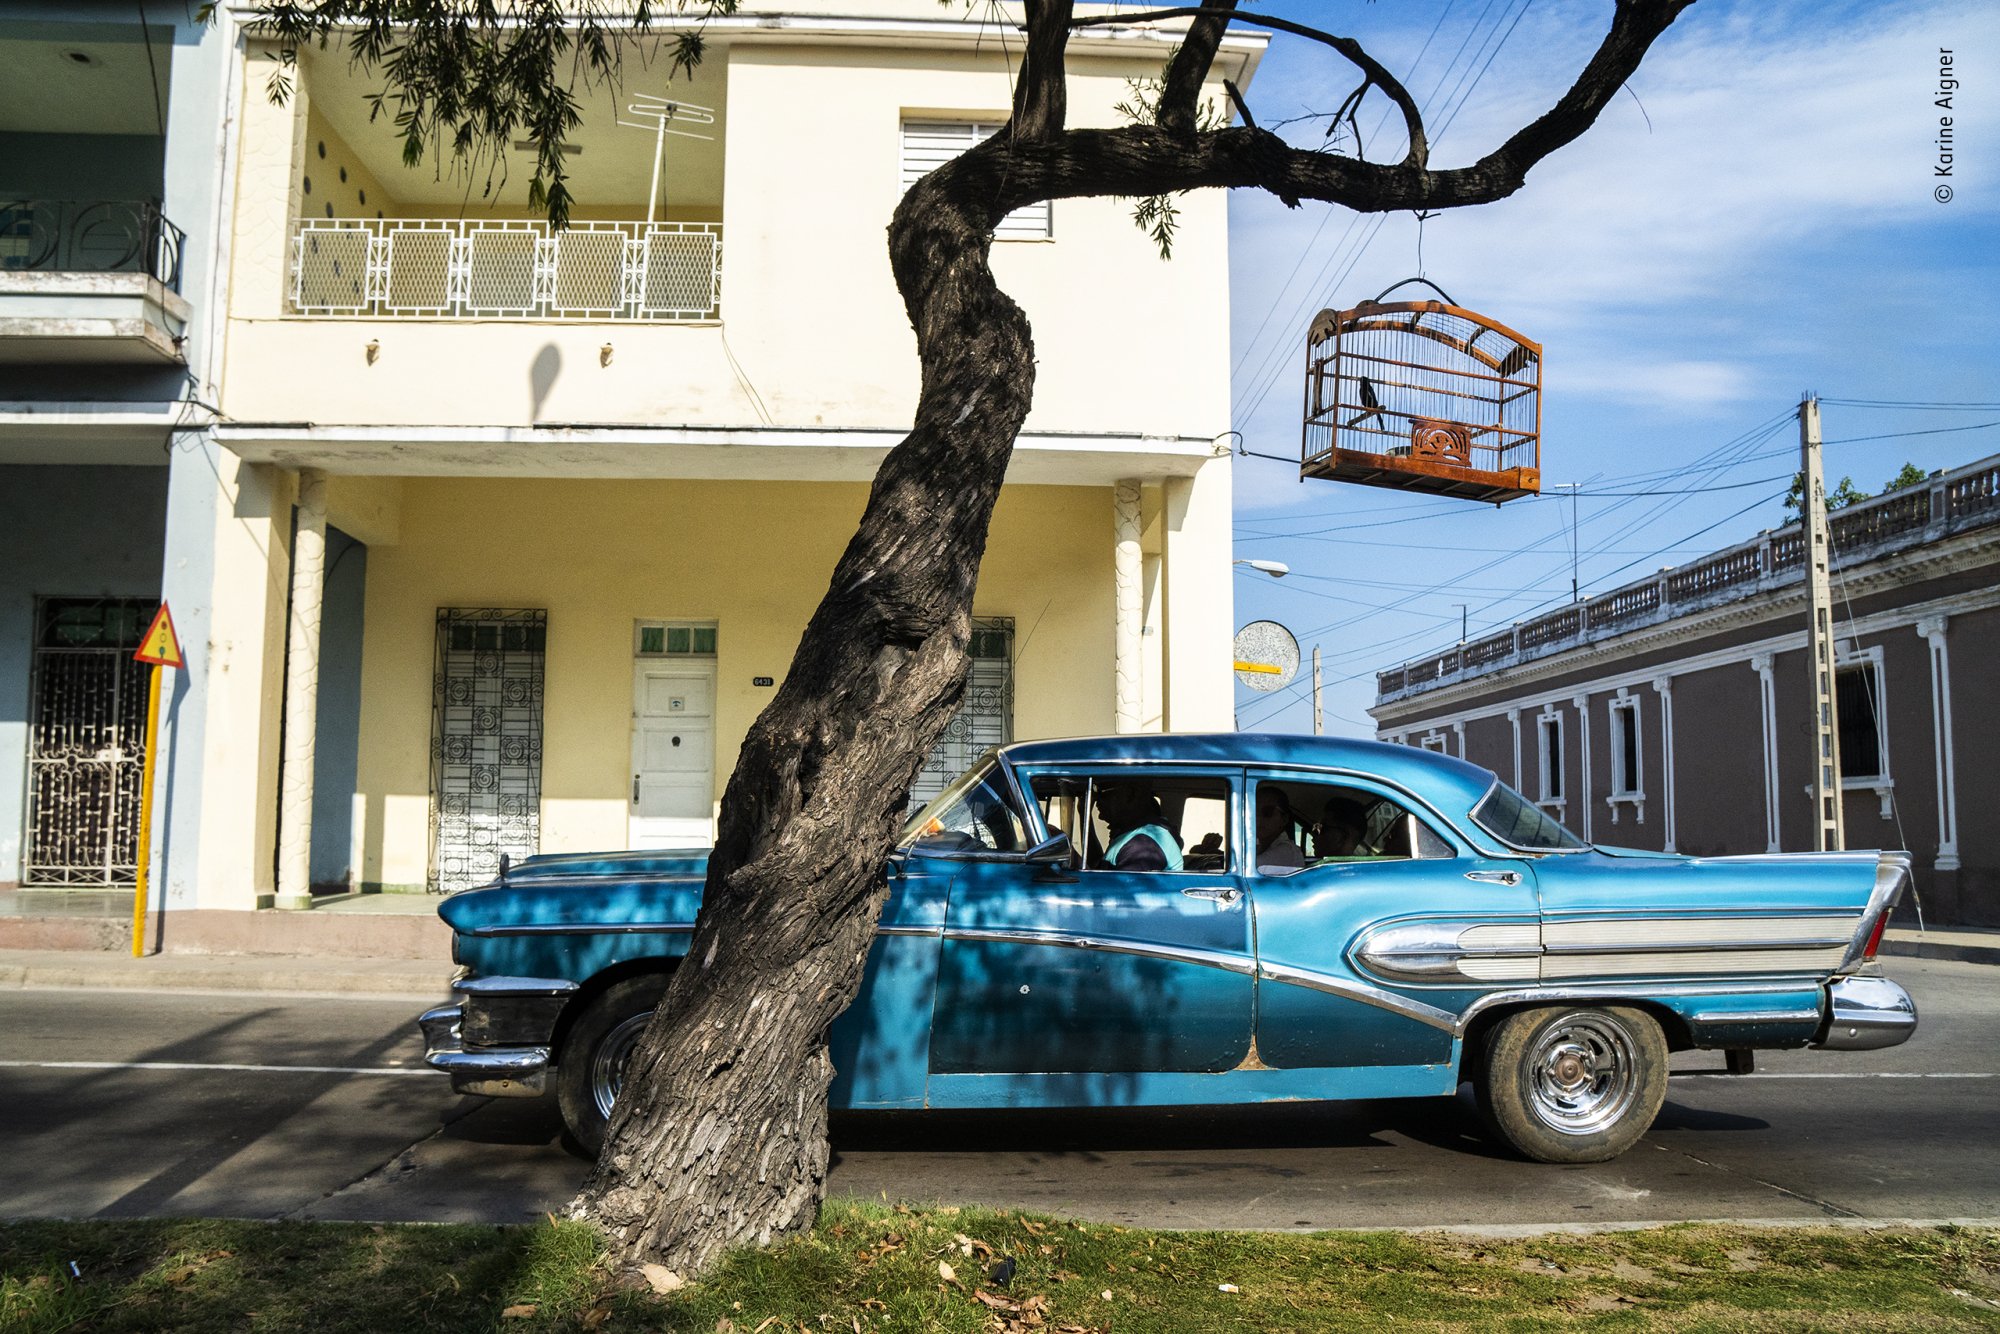 A street in Cuba, with a blue car and a small bird's cage hanging from a tree.